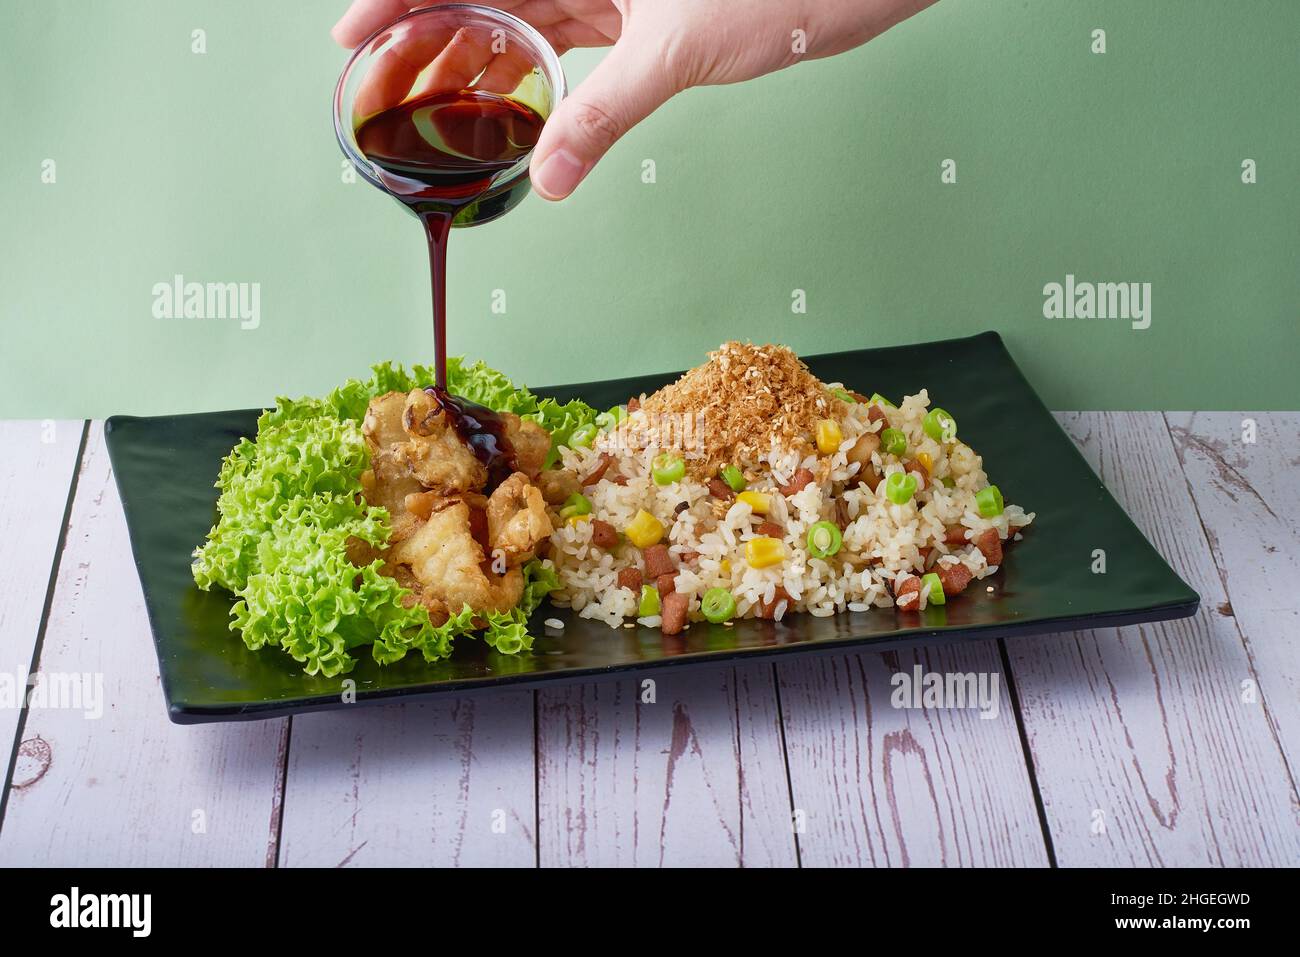 Traditional chinese food Fried Rice Yang Zhou with Abalone Mushroom and Teriyaki Sauce in black tray on wood table background Stock Photo